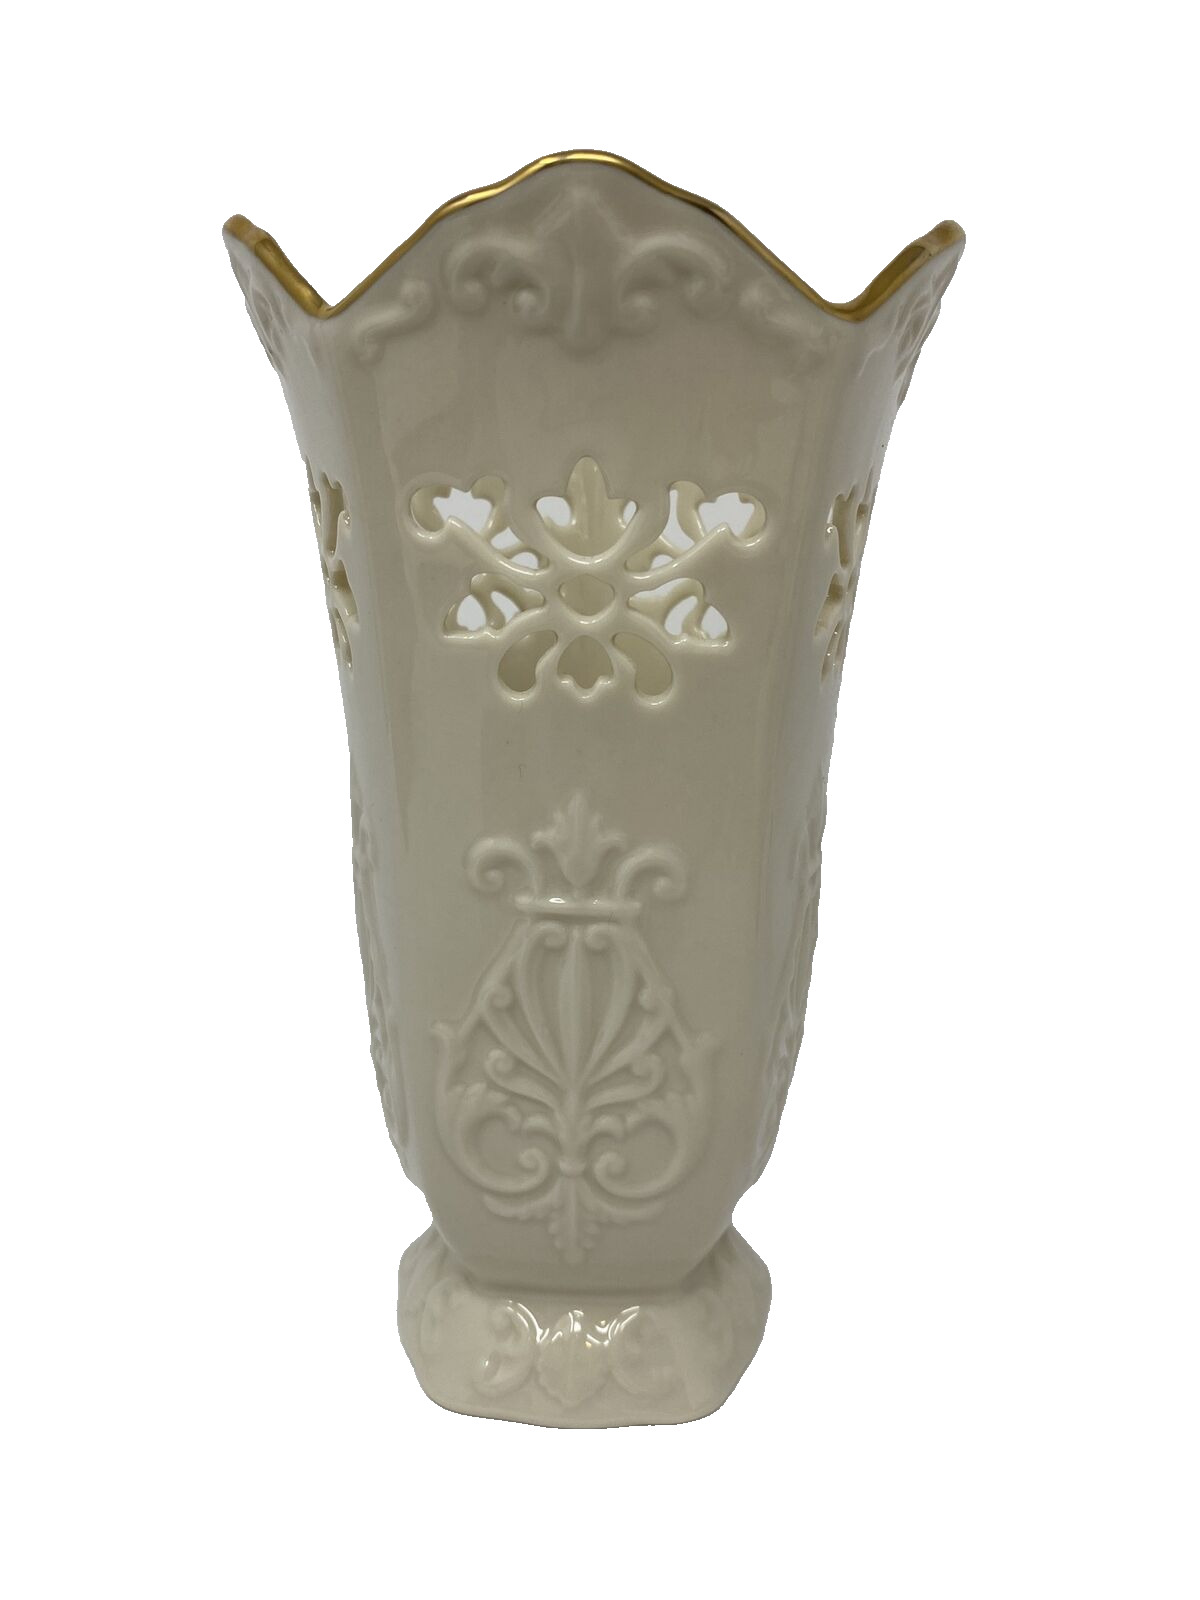 LENOX Cream and Gold Vase with Cutwork